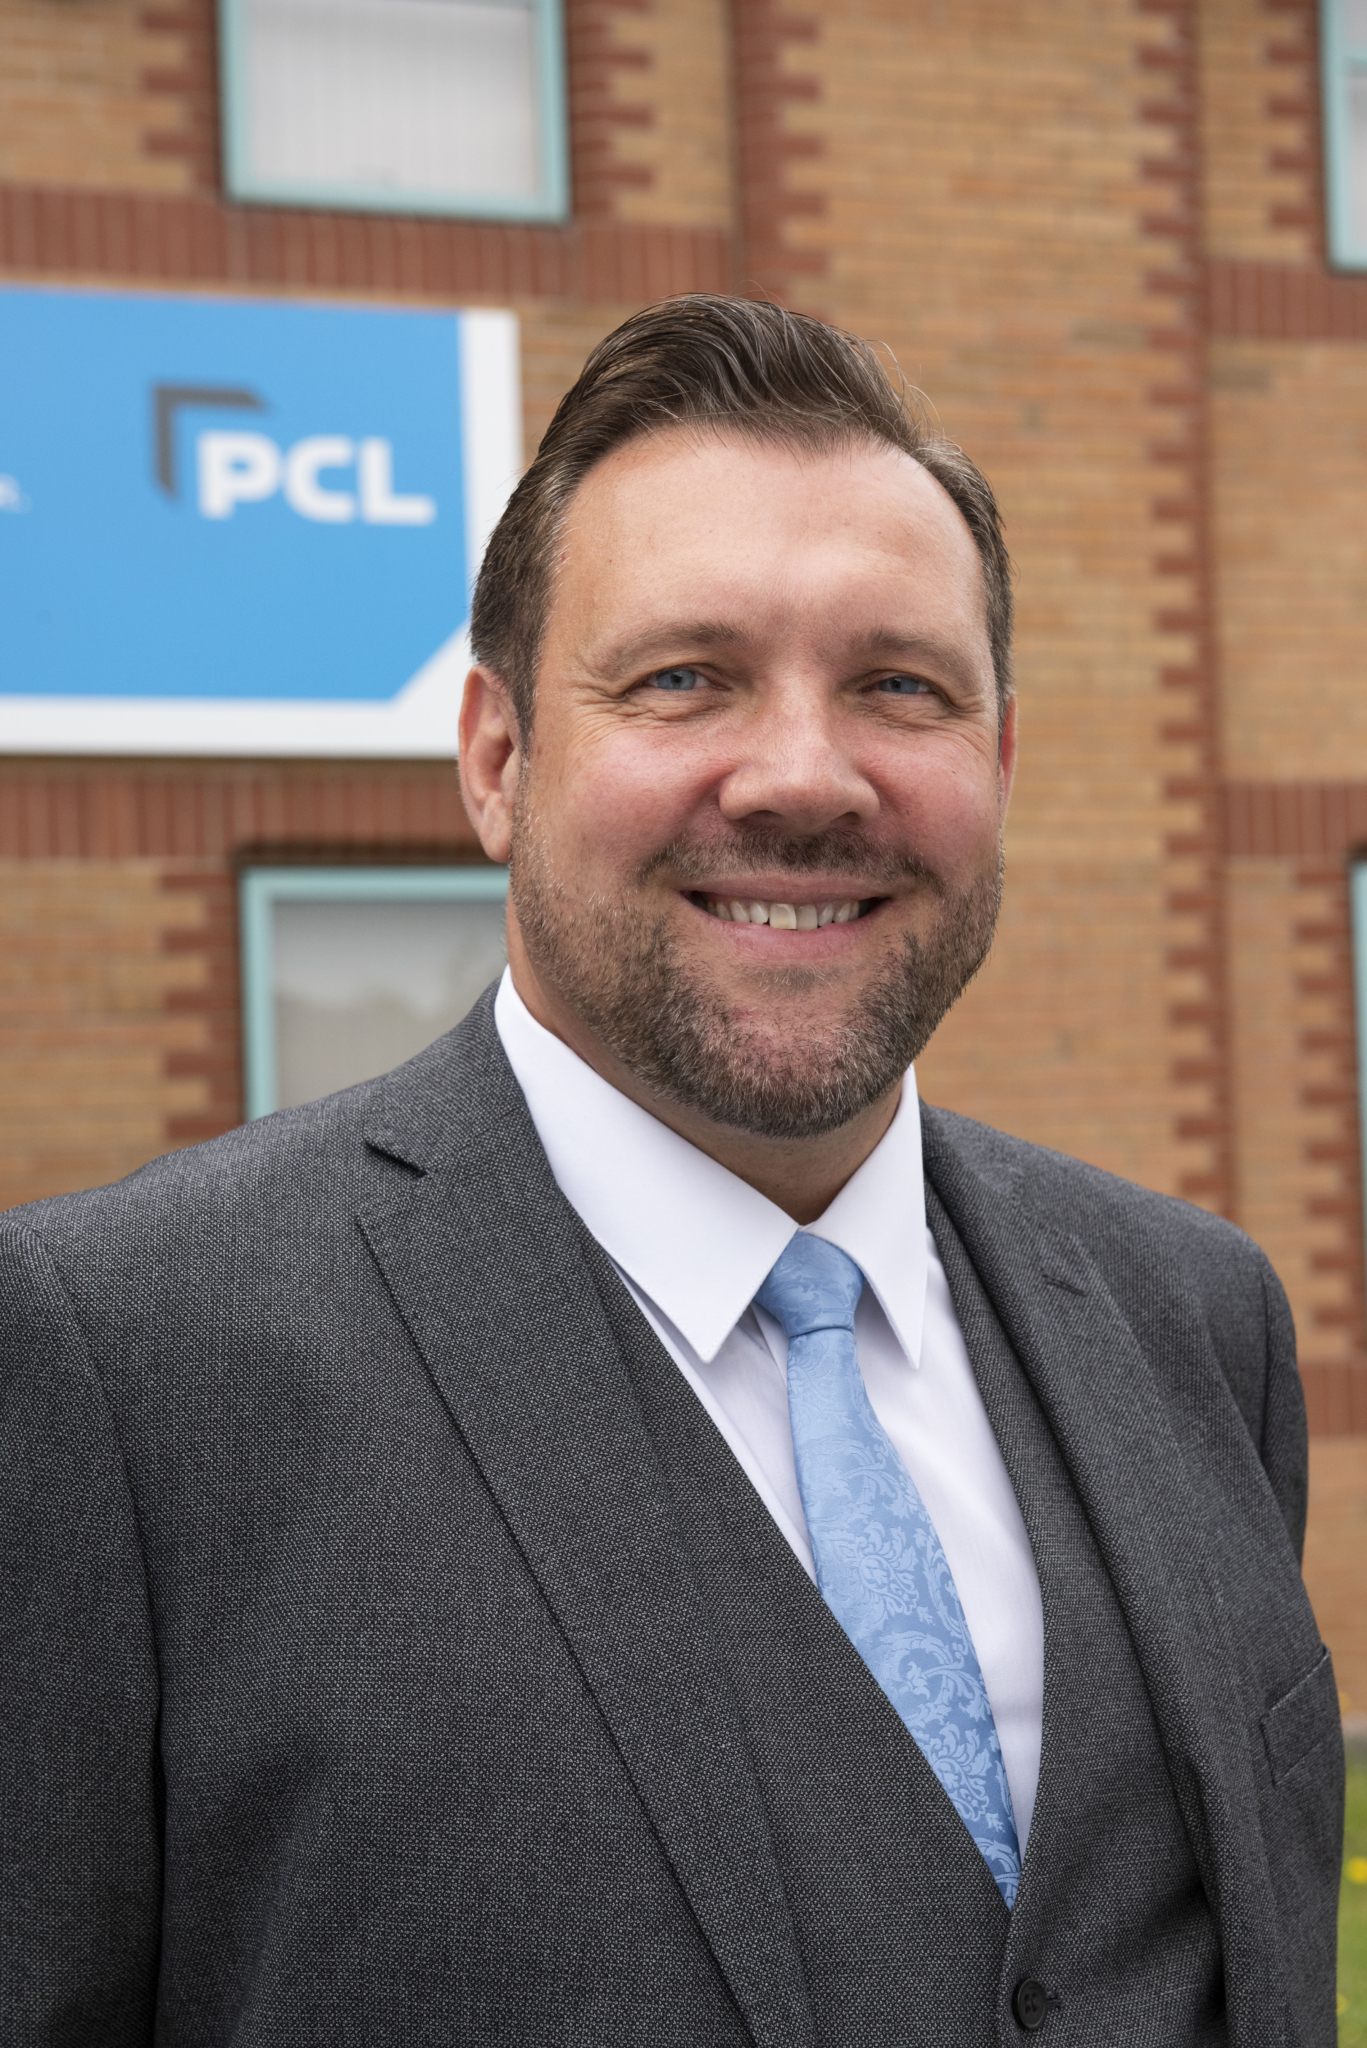 PCL appoints new operations director